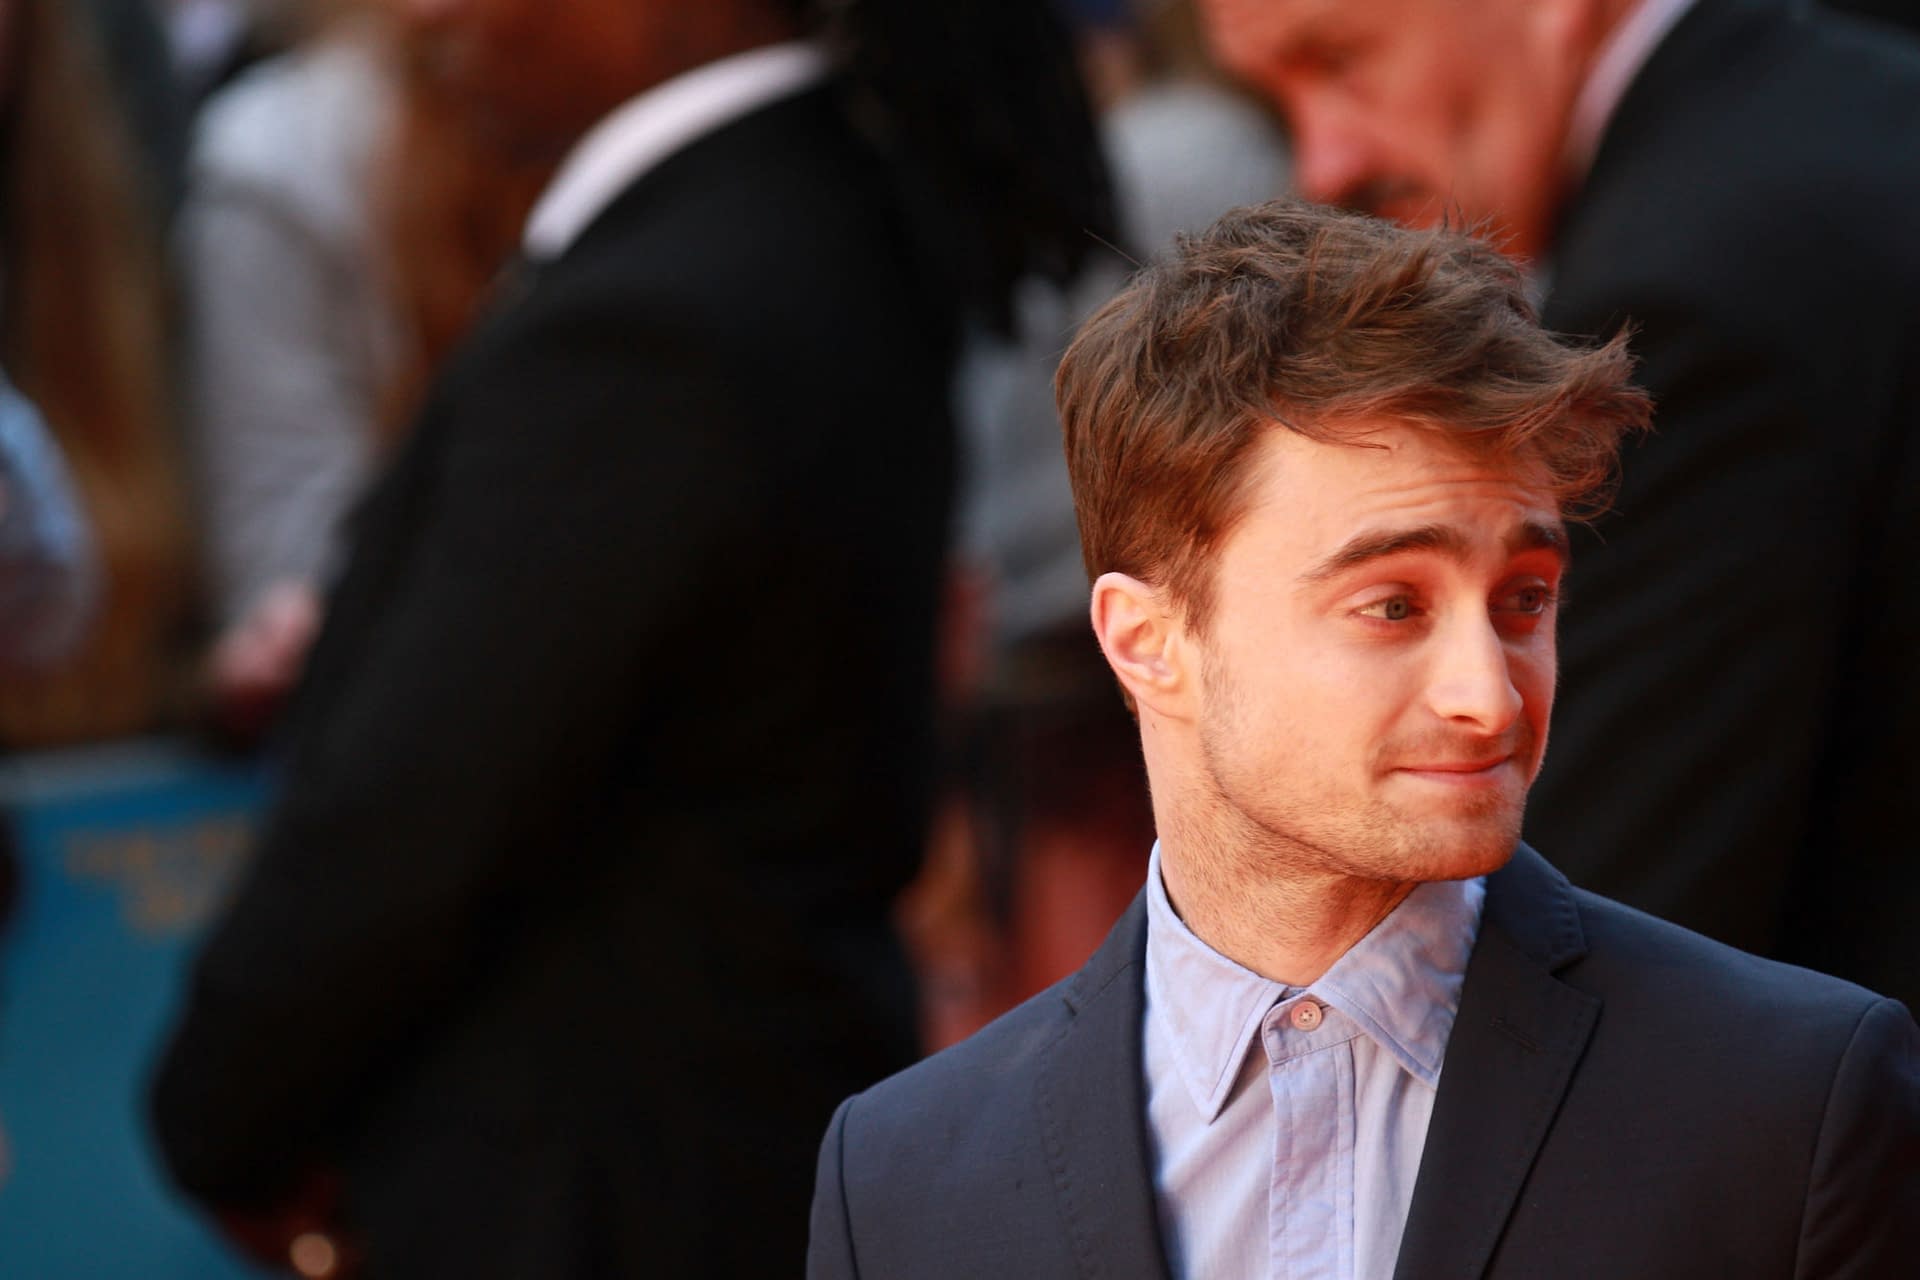 Could Daniel Radcliffe Really Be Filming New Harry Potter Scenes in London With JK Rowling?